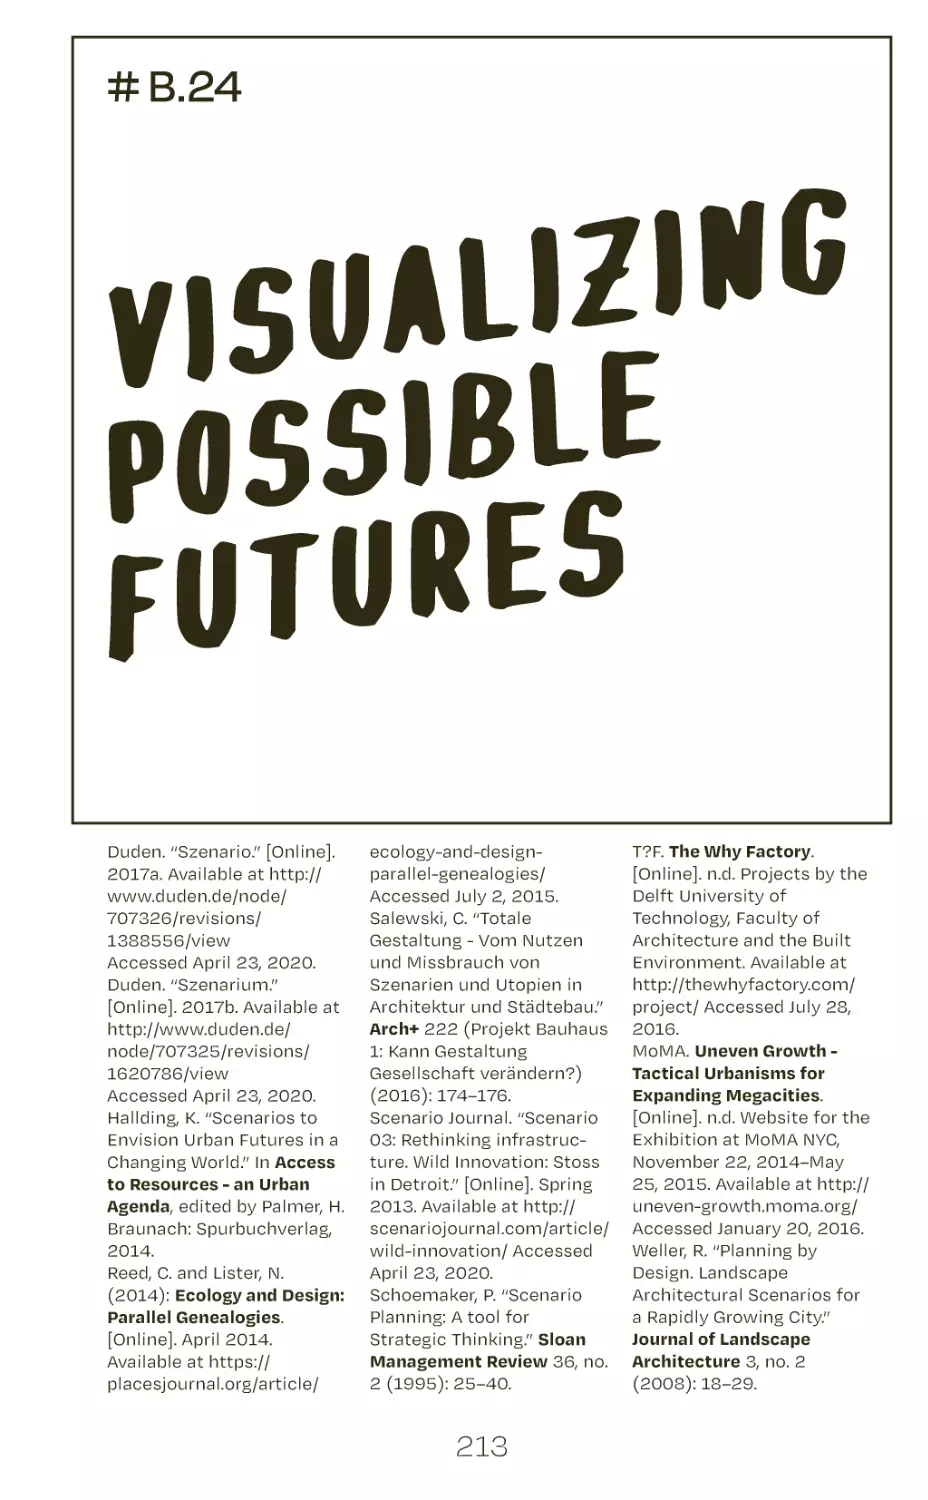 # B.24 visualizing possible futures